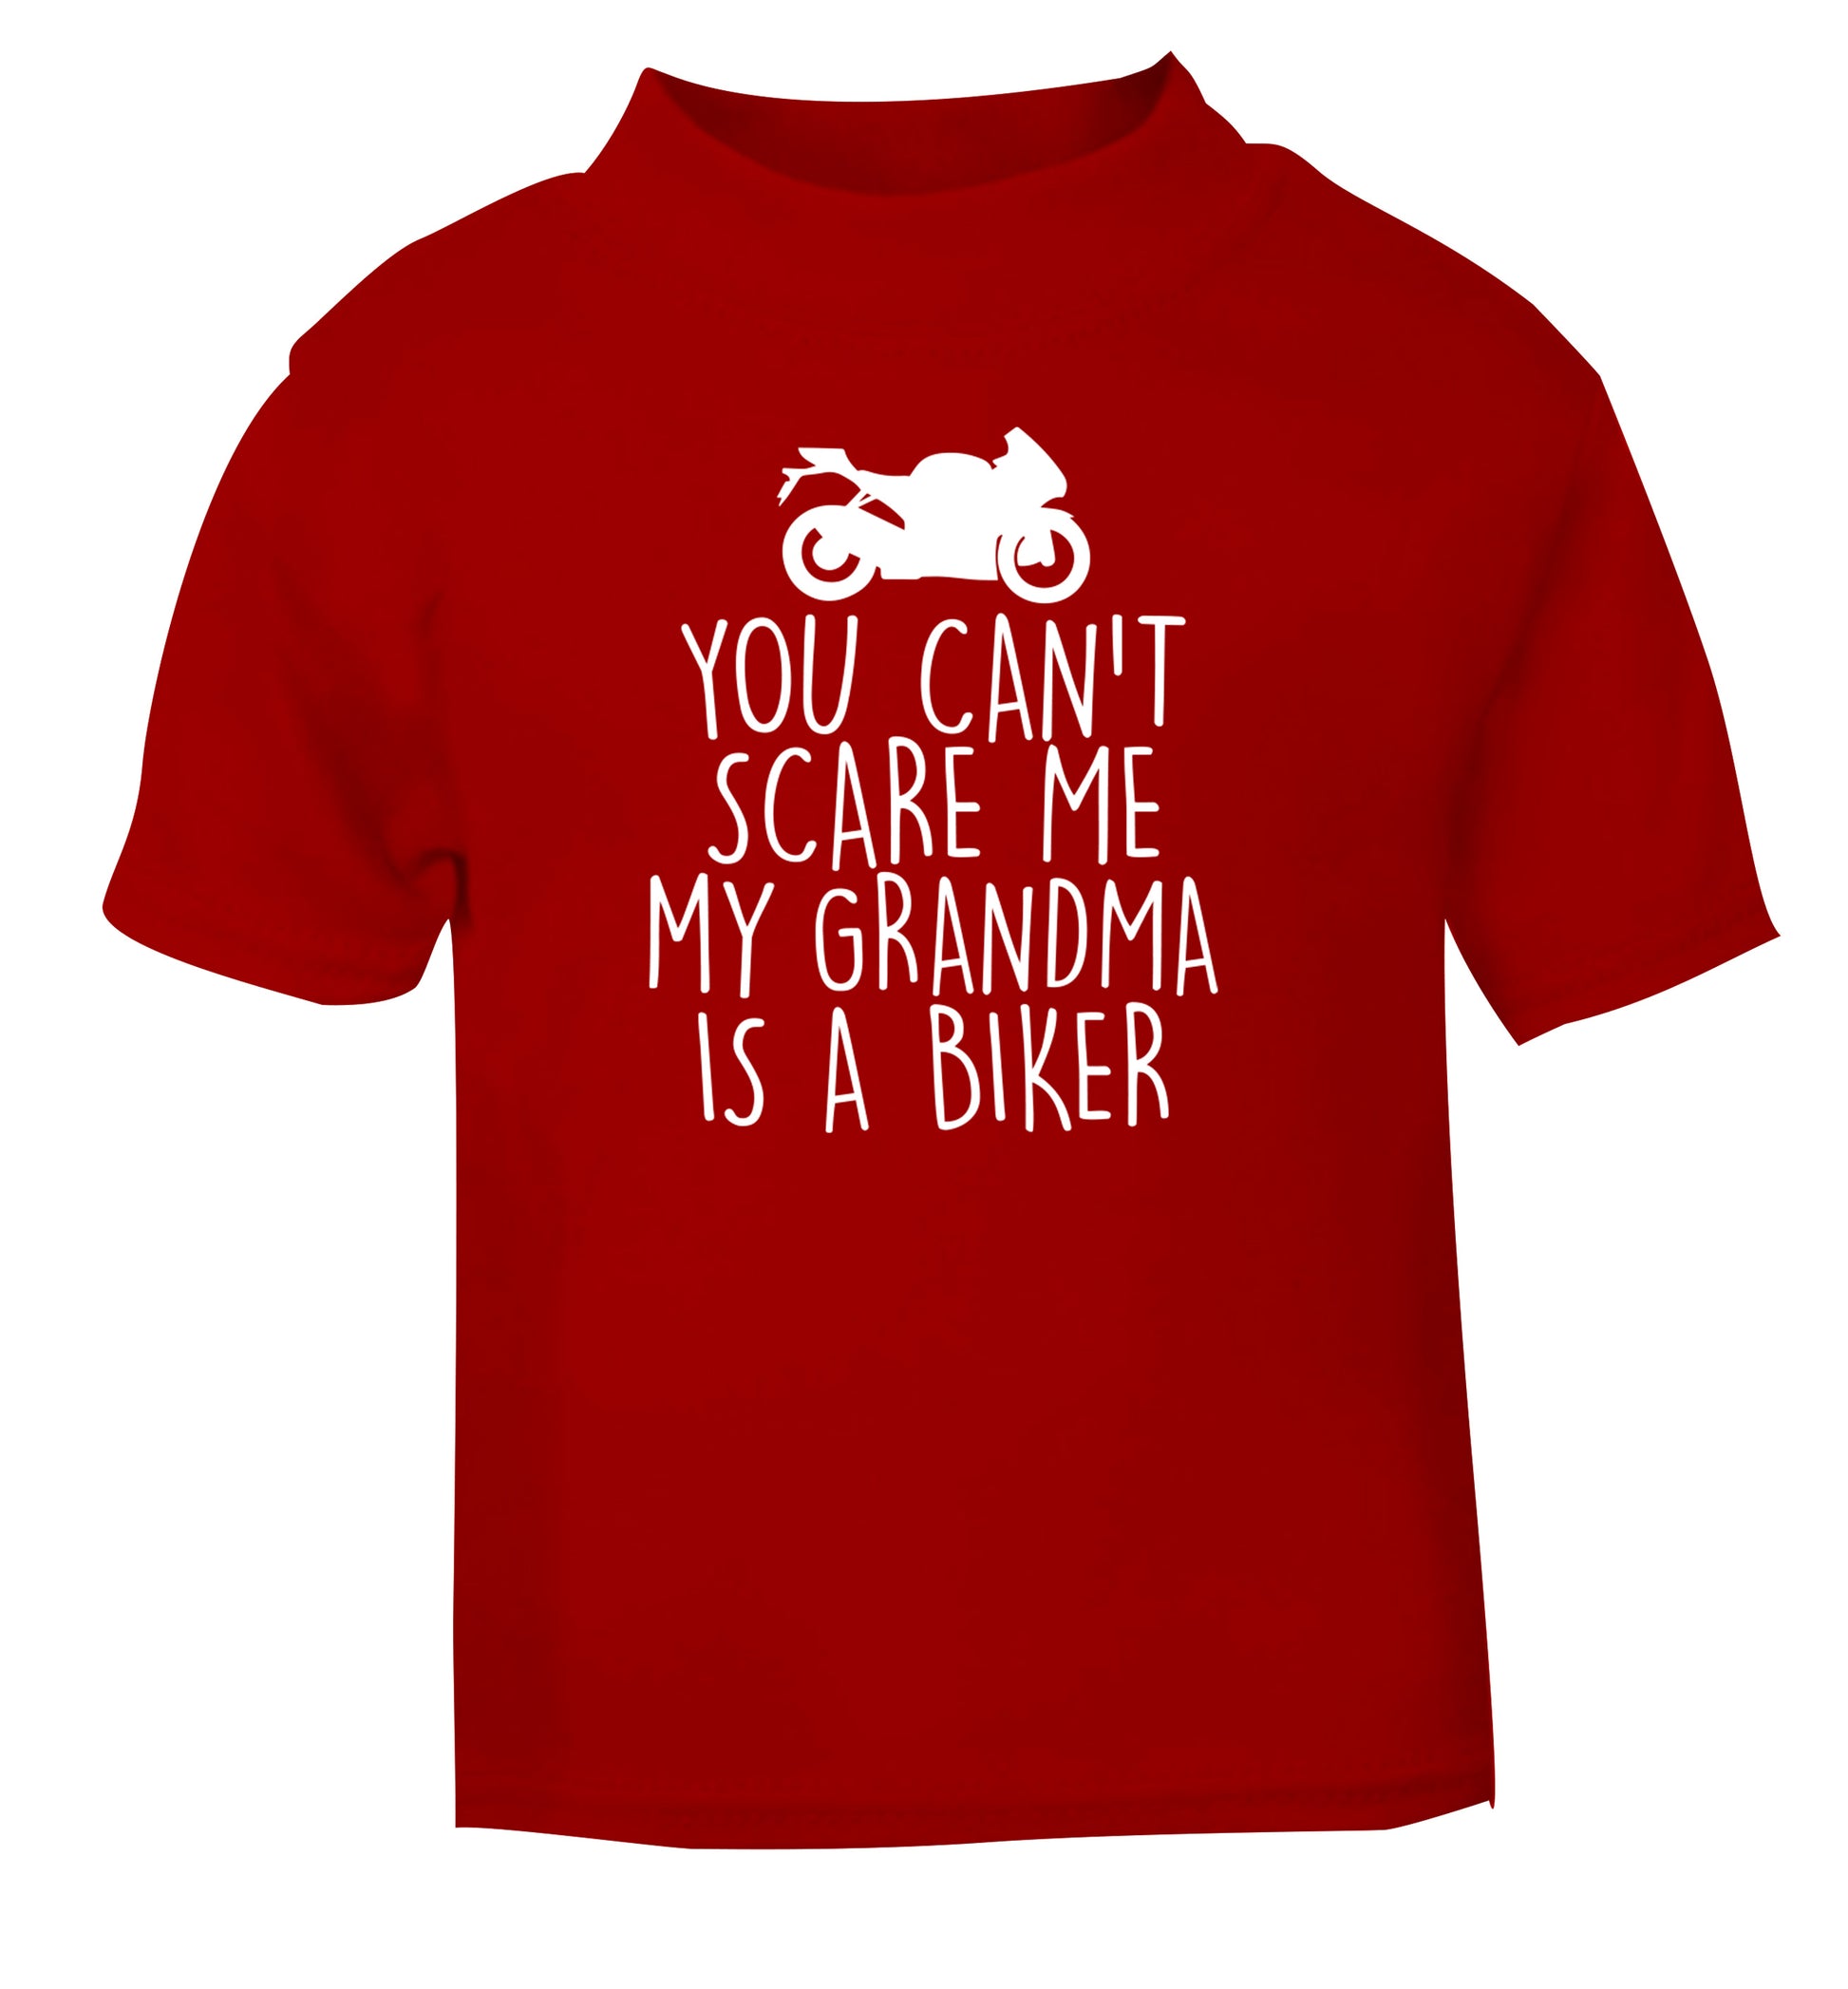 You can't scare me my grandma is a biker red Baby Toddler Tshirt 2 Years